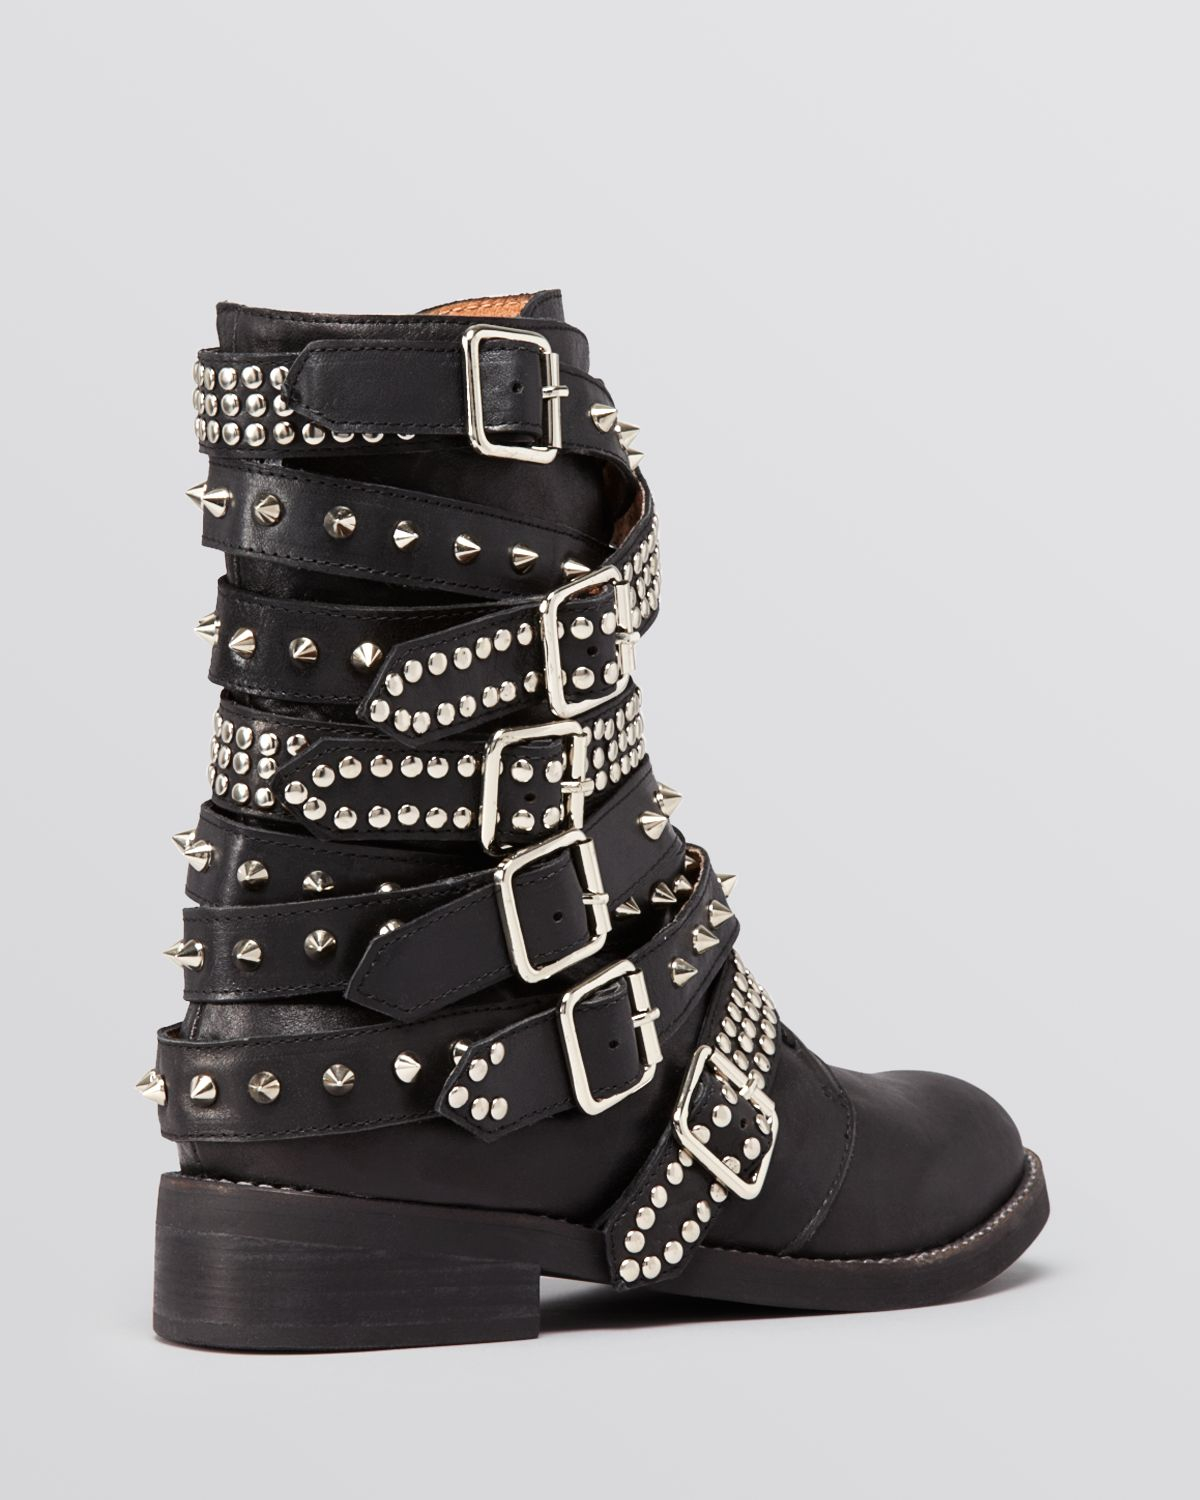 Jeffrey Campbell Short Boots - Cruzados Studded in Black - Lyst